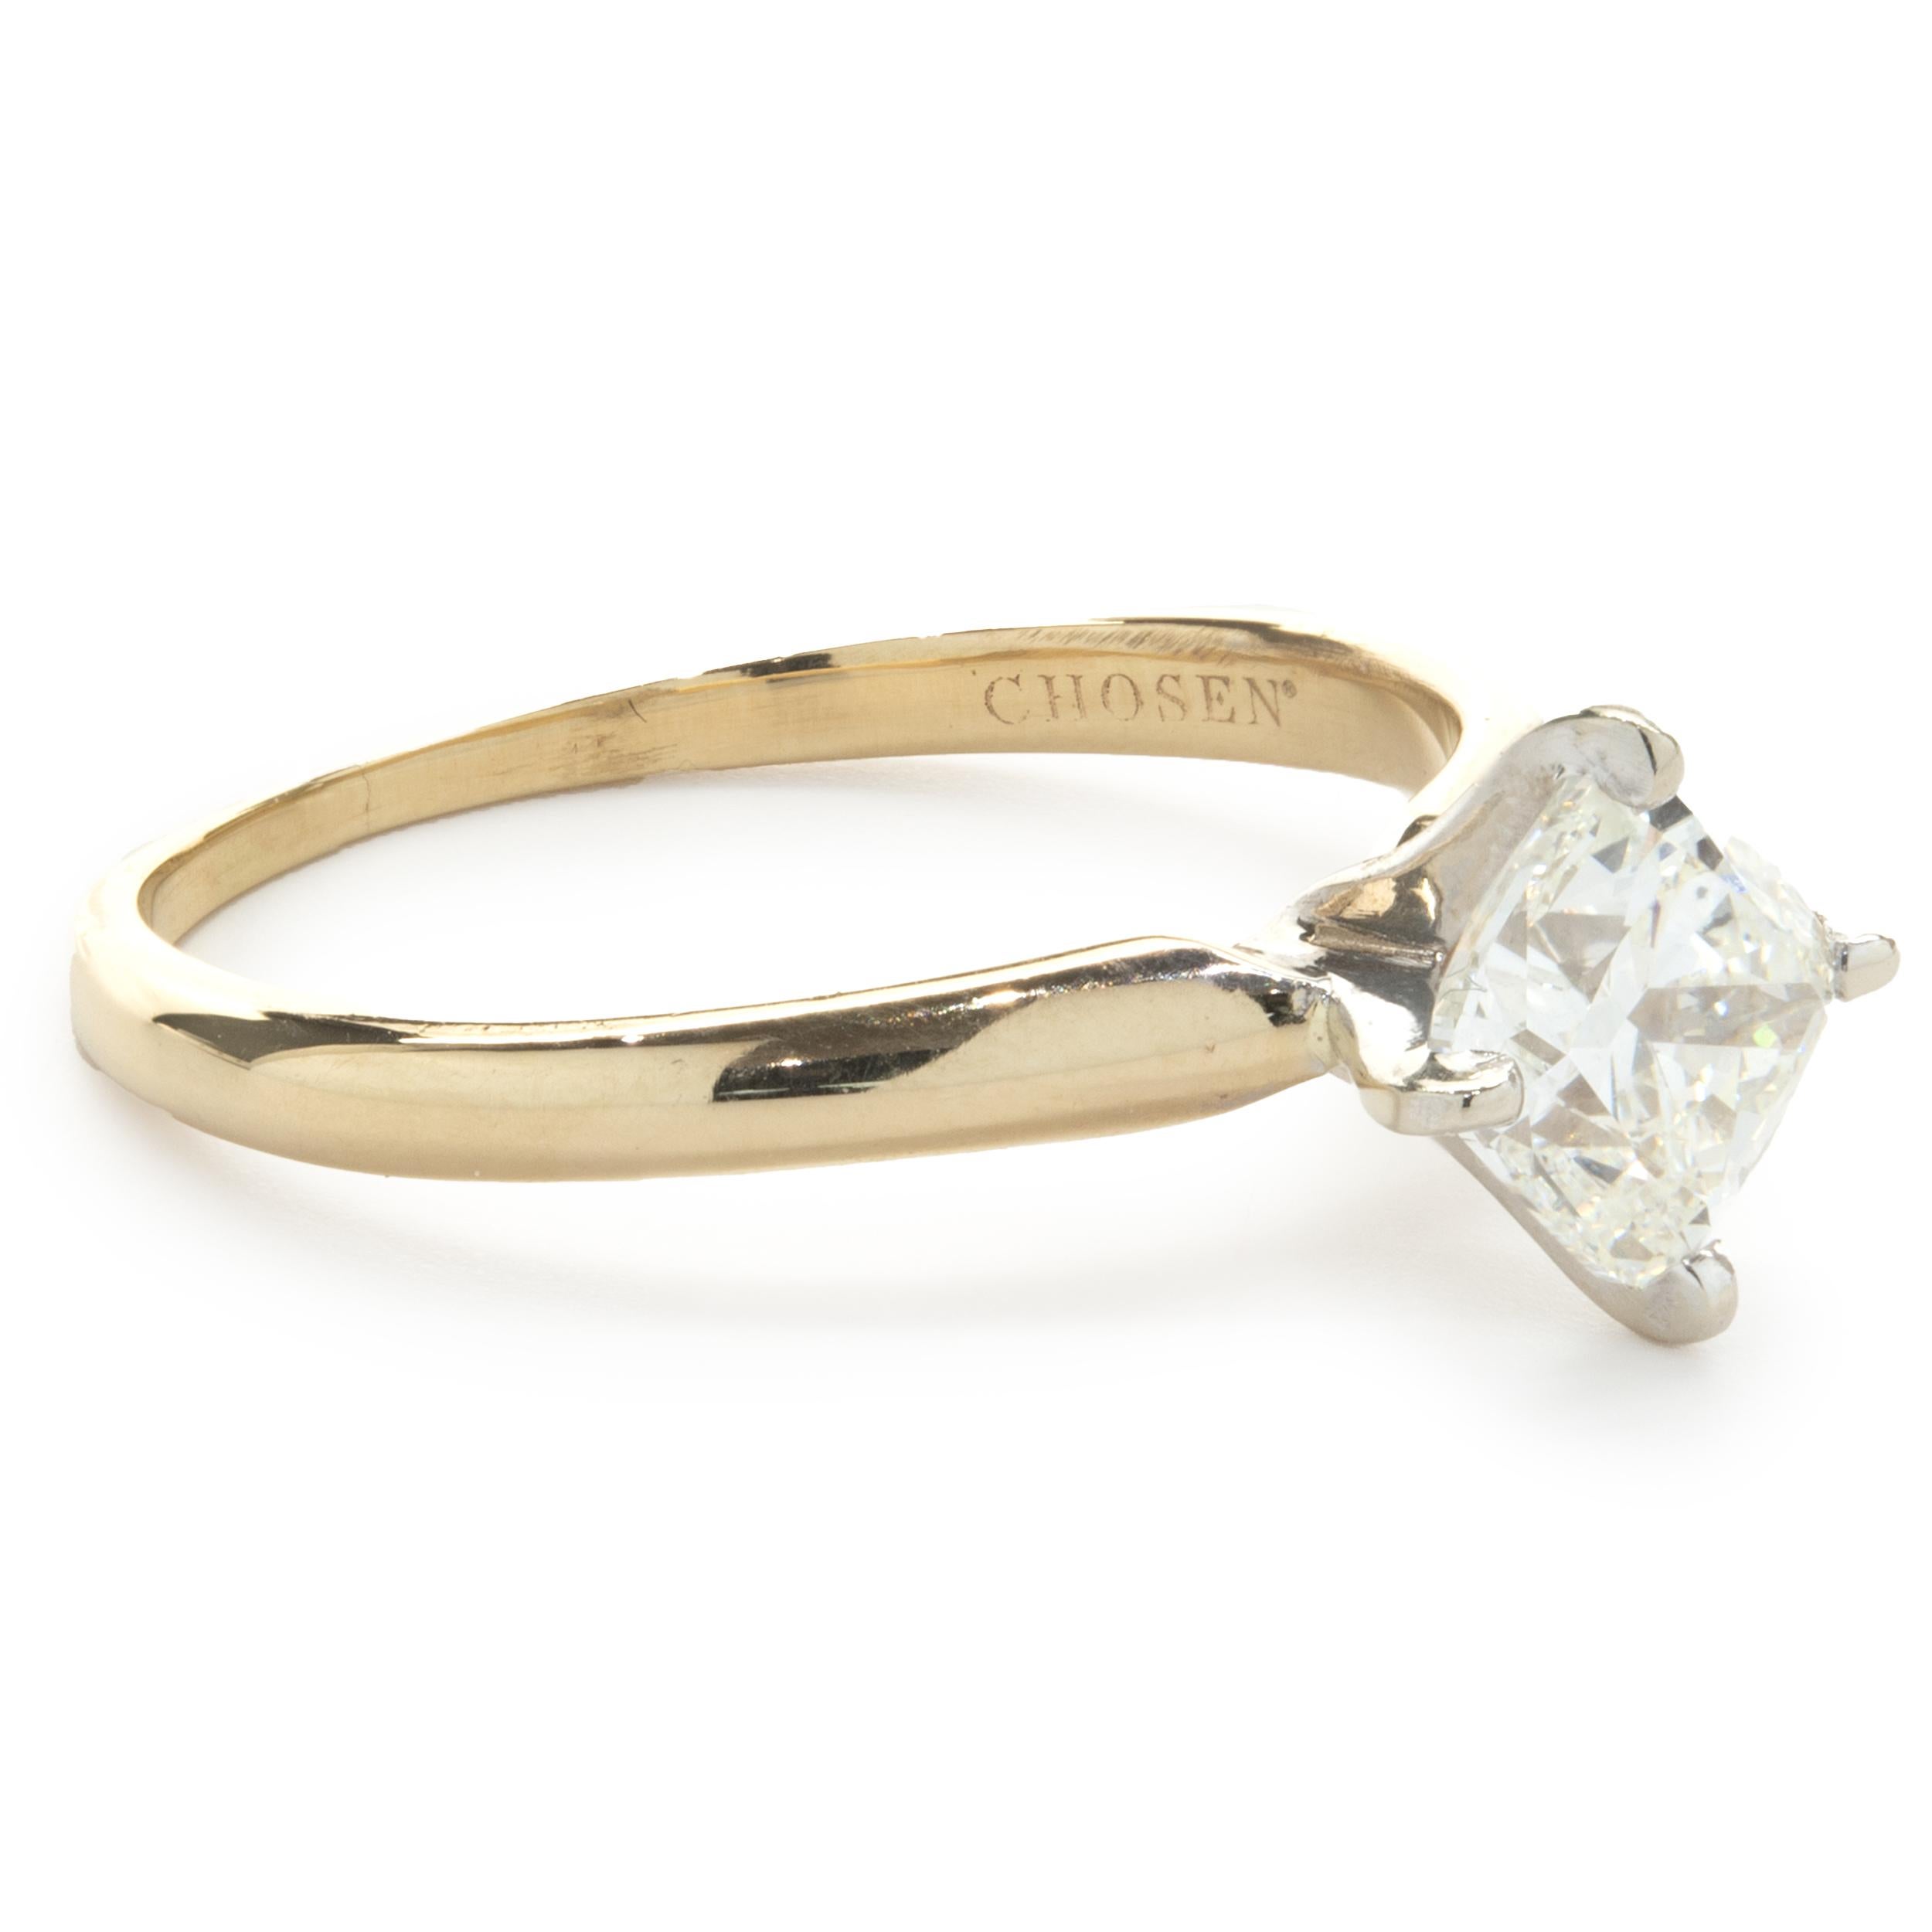 Designer: custom
Material: 14K yellow gold
Diamond: 1 cushion cut = 0.94cttw
Color: I
Clarity: SI1
Ring Size: 6.75 (please allow up to 2 additional business days for sizing requests)
Dimensions: ring top measures 8.18mm wide
Weight: 2.28 grams
